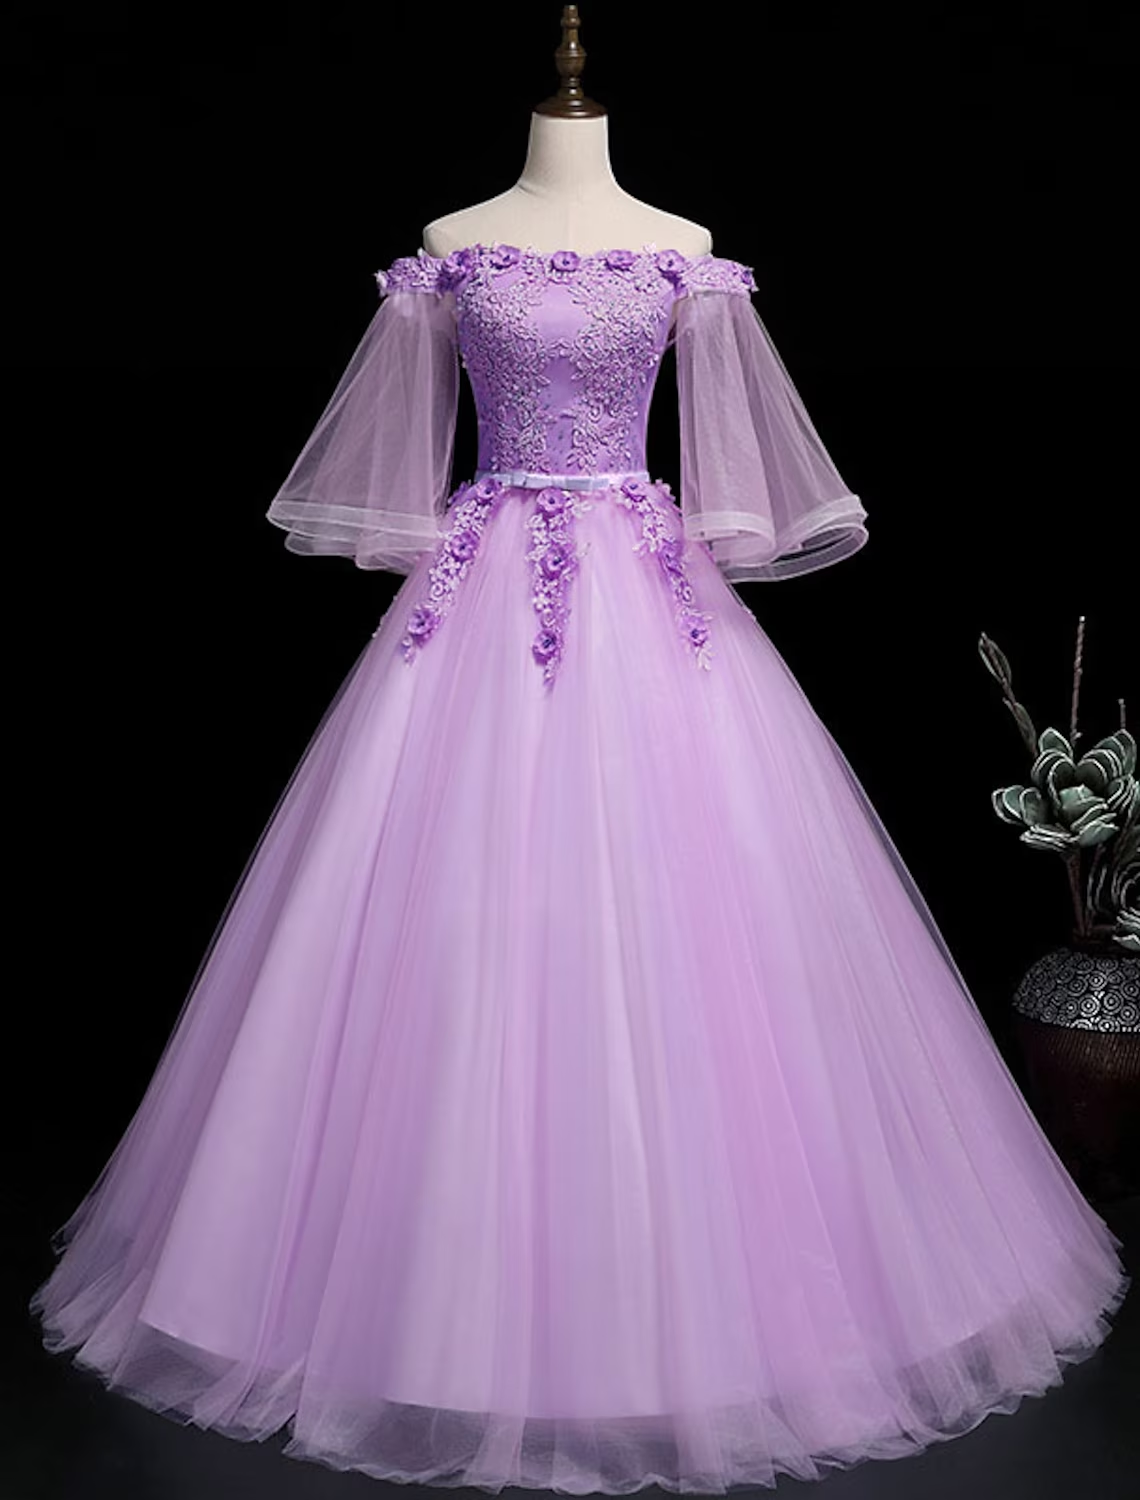 Ball Gown Luxurious Floral Quinceanera Prom Birthday Dress Off Shoulder 3/4 Length Sleeve Floor Length Tulle with Sash / Ribbon Embroidery